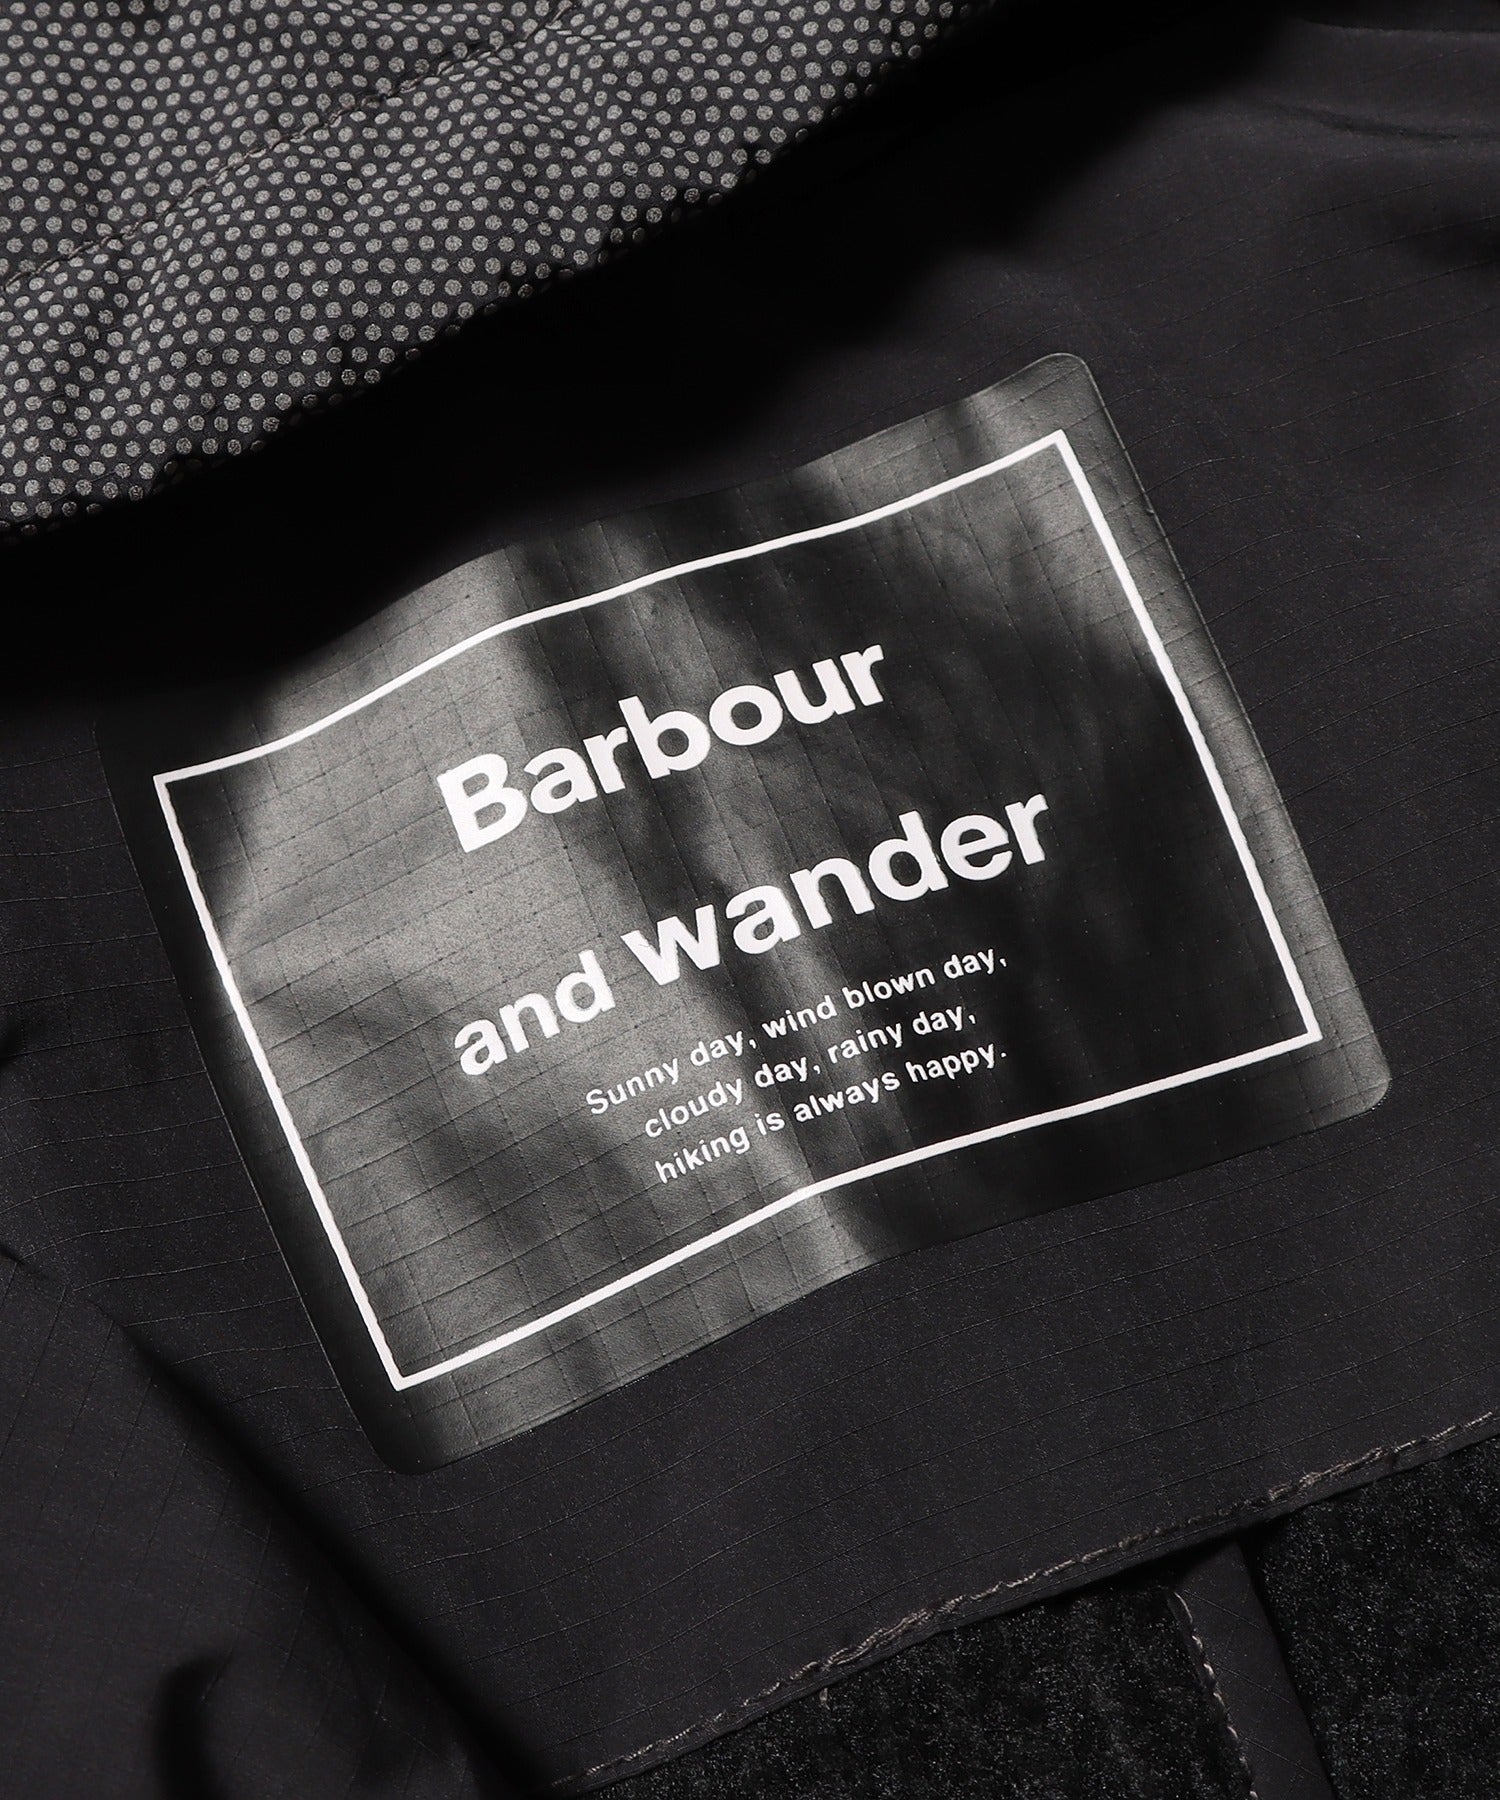 and wander×Barbour Insulate